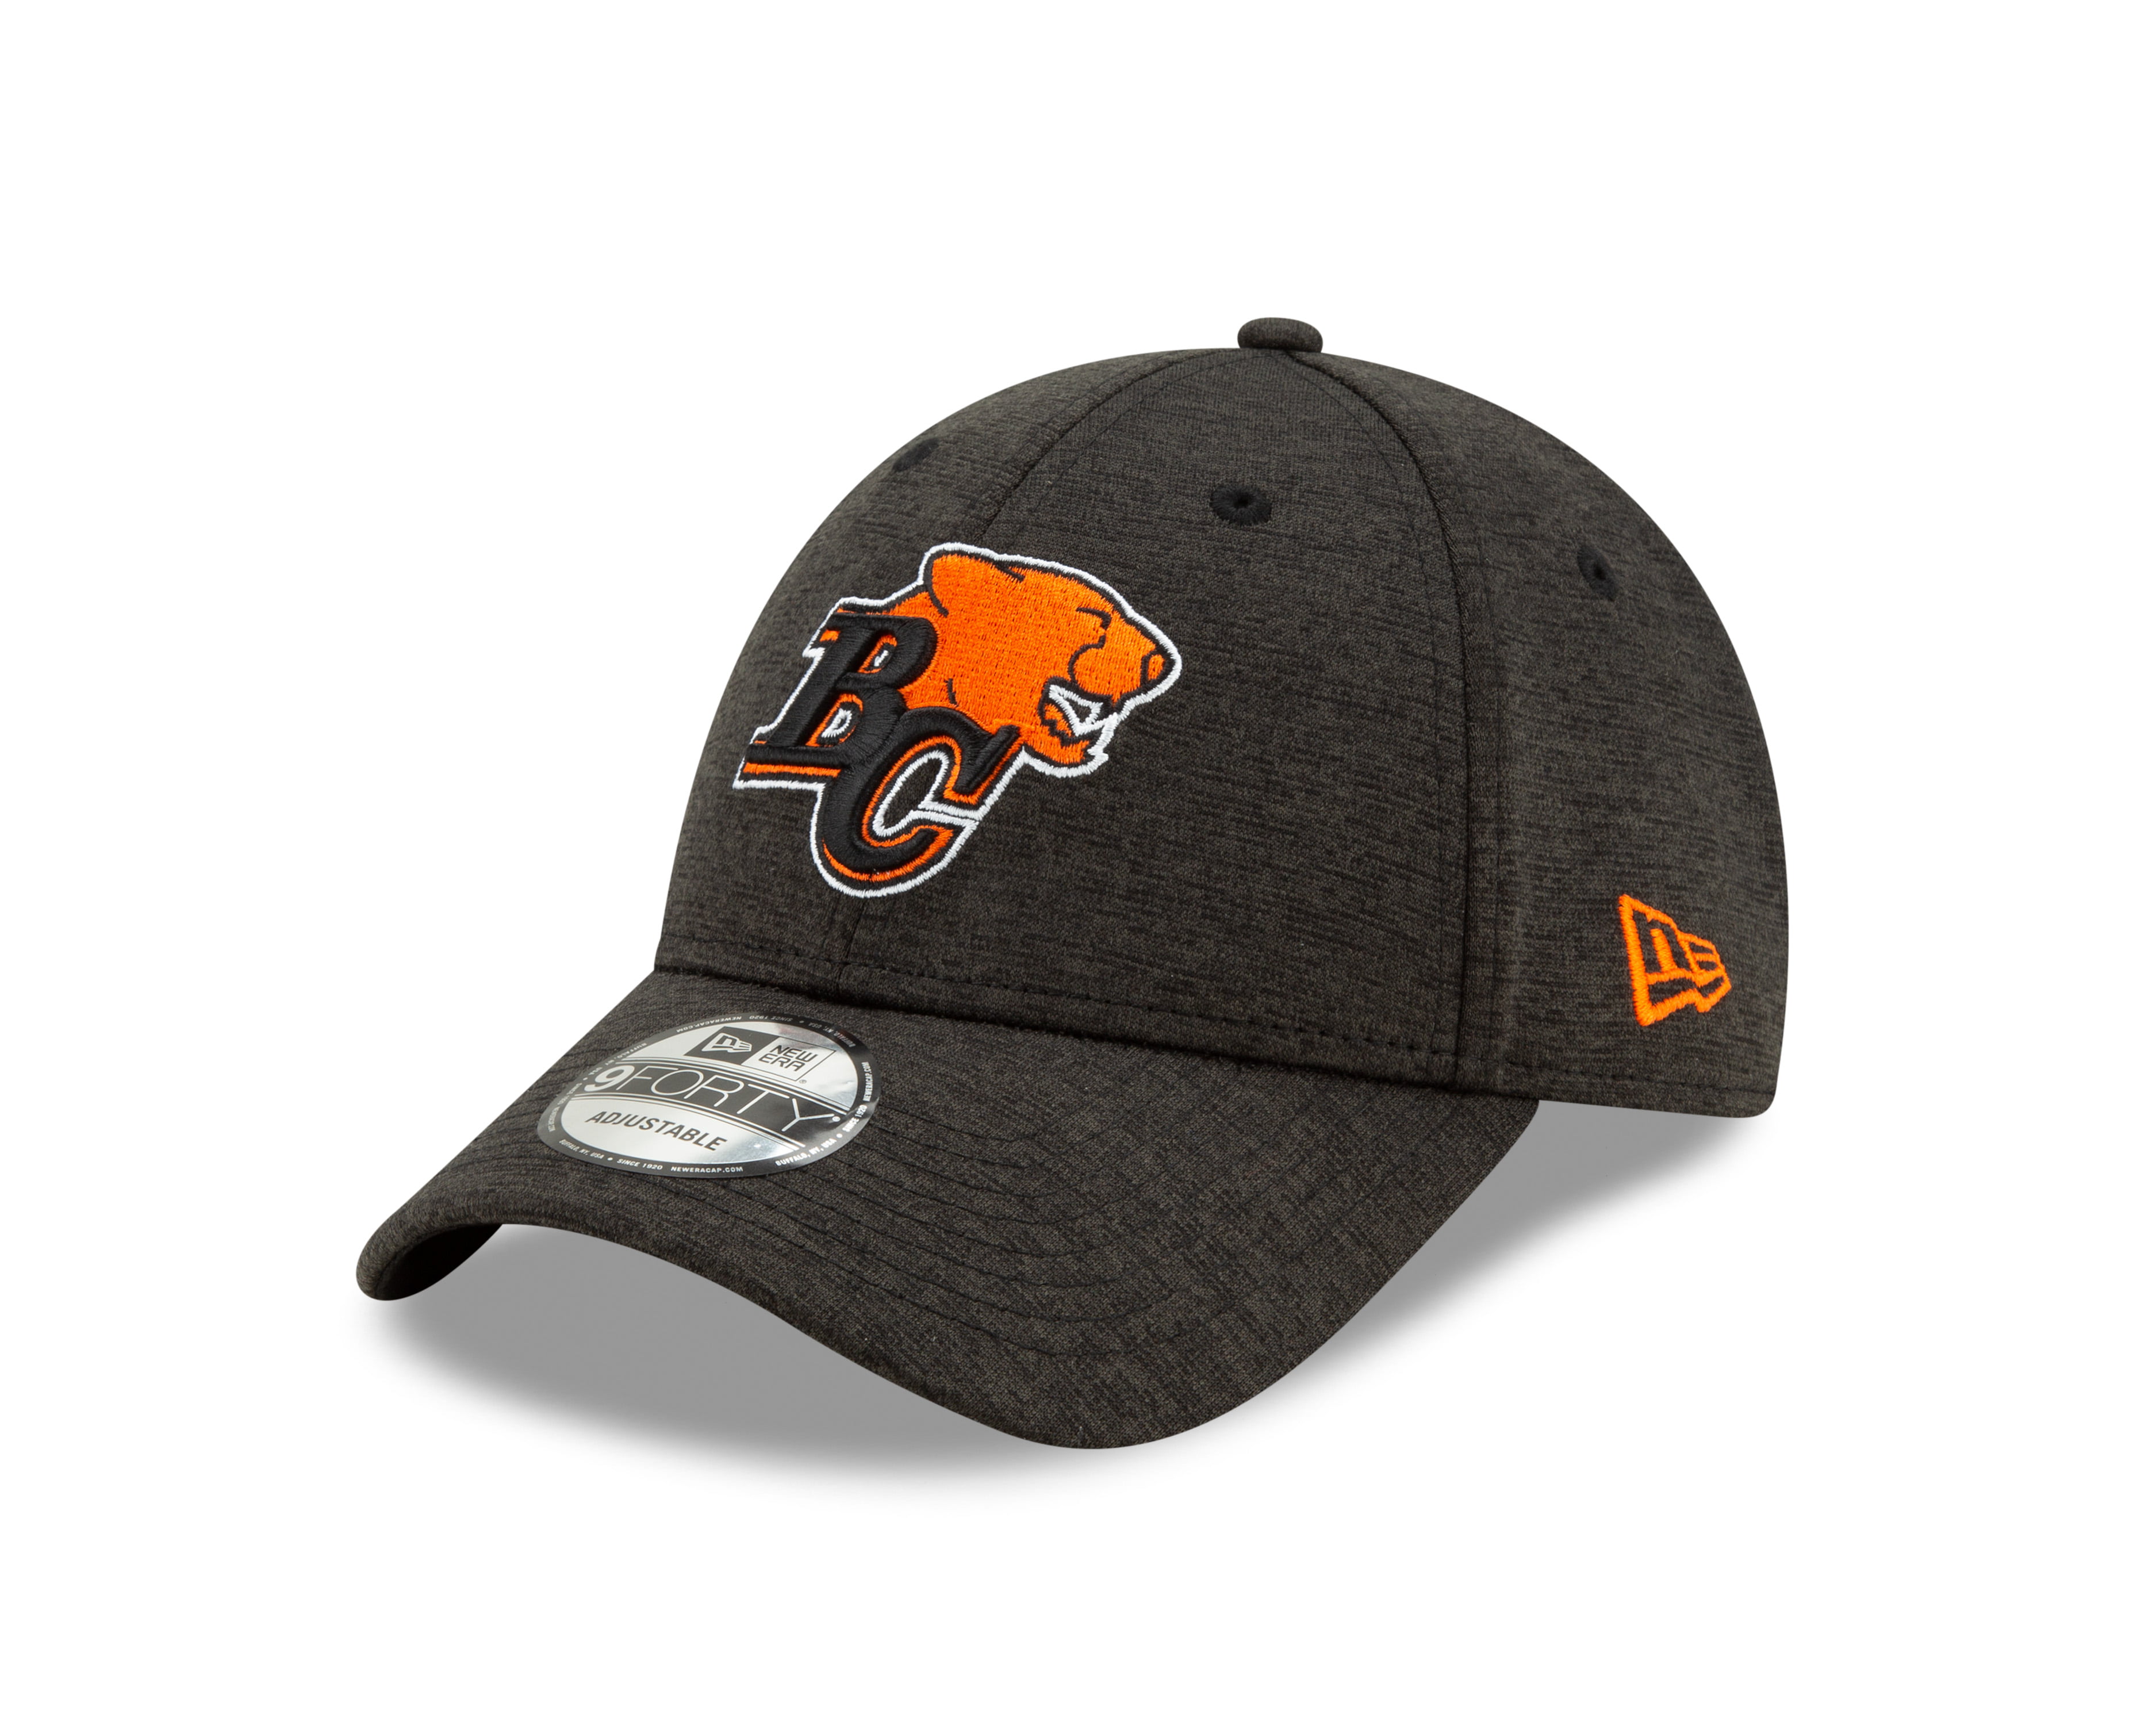 Men's BC Lions CFL OnField Sideline 9FORTY Cap Walmart Canada